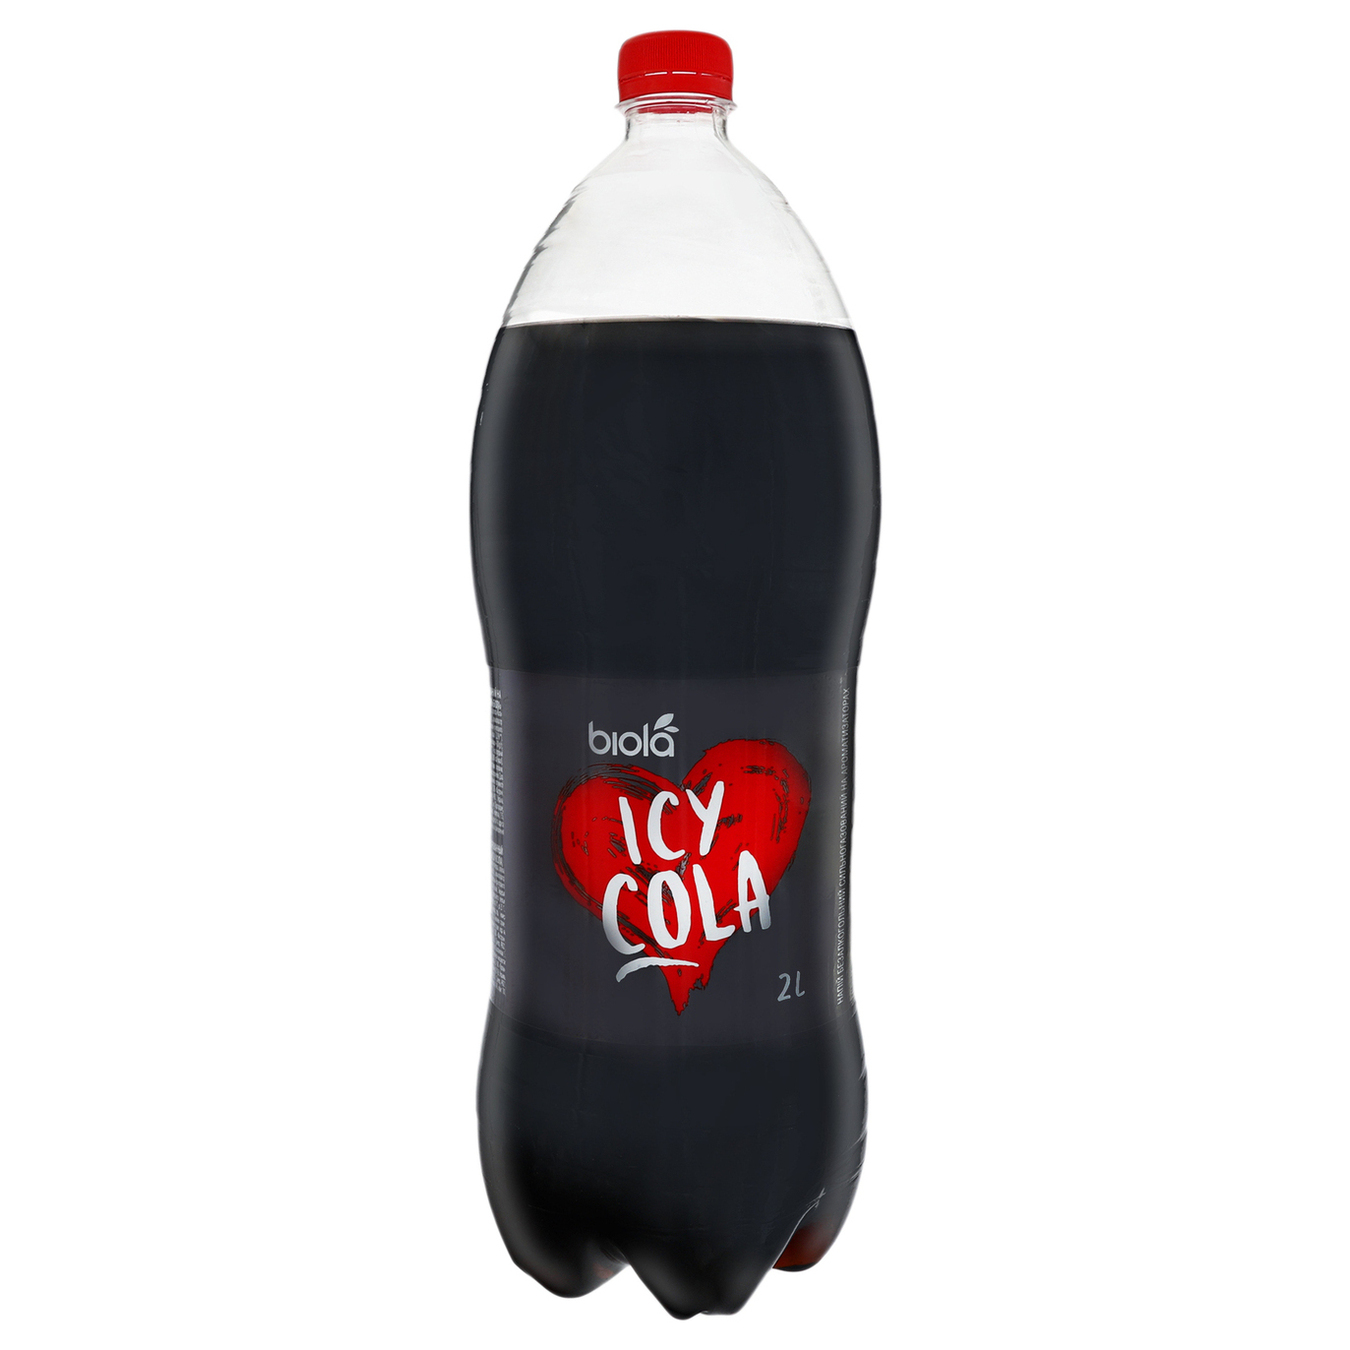 Biola Icy Cola Non-alcoholic strongly carbonated drink 2l